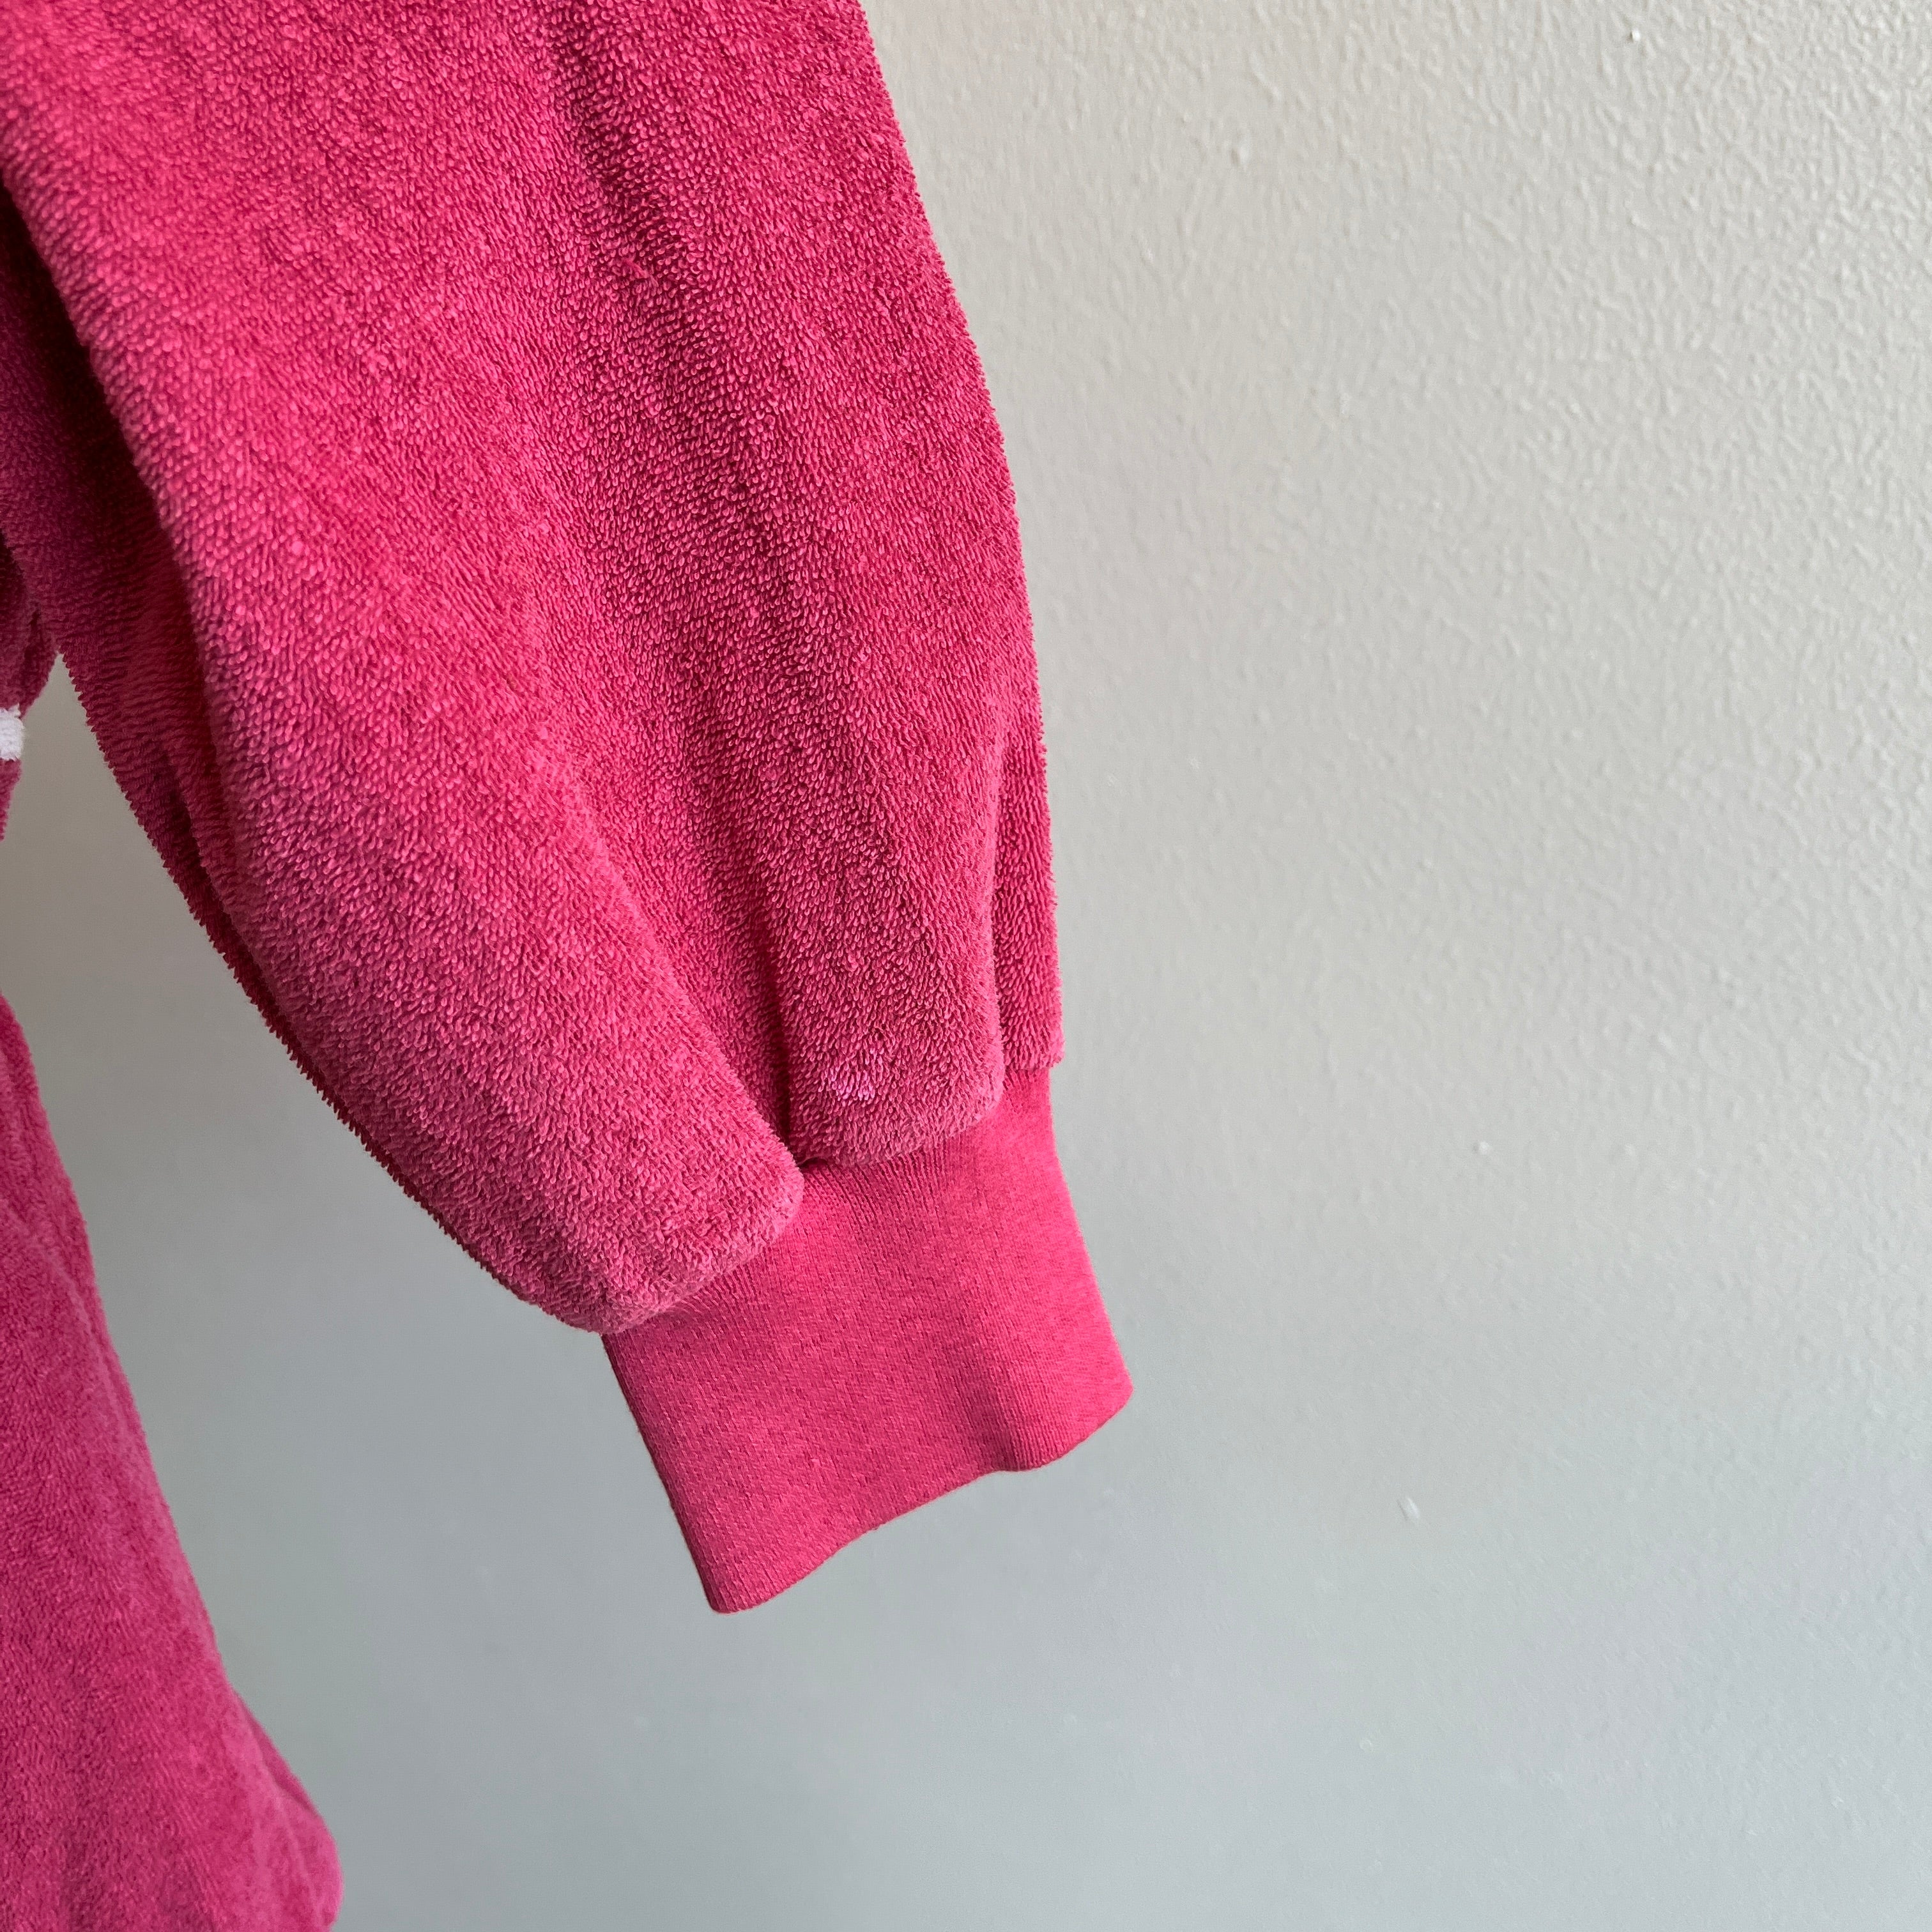 1980s Pink Terry Cloth Sweatshirt - Personal Collection